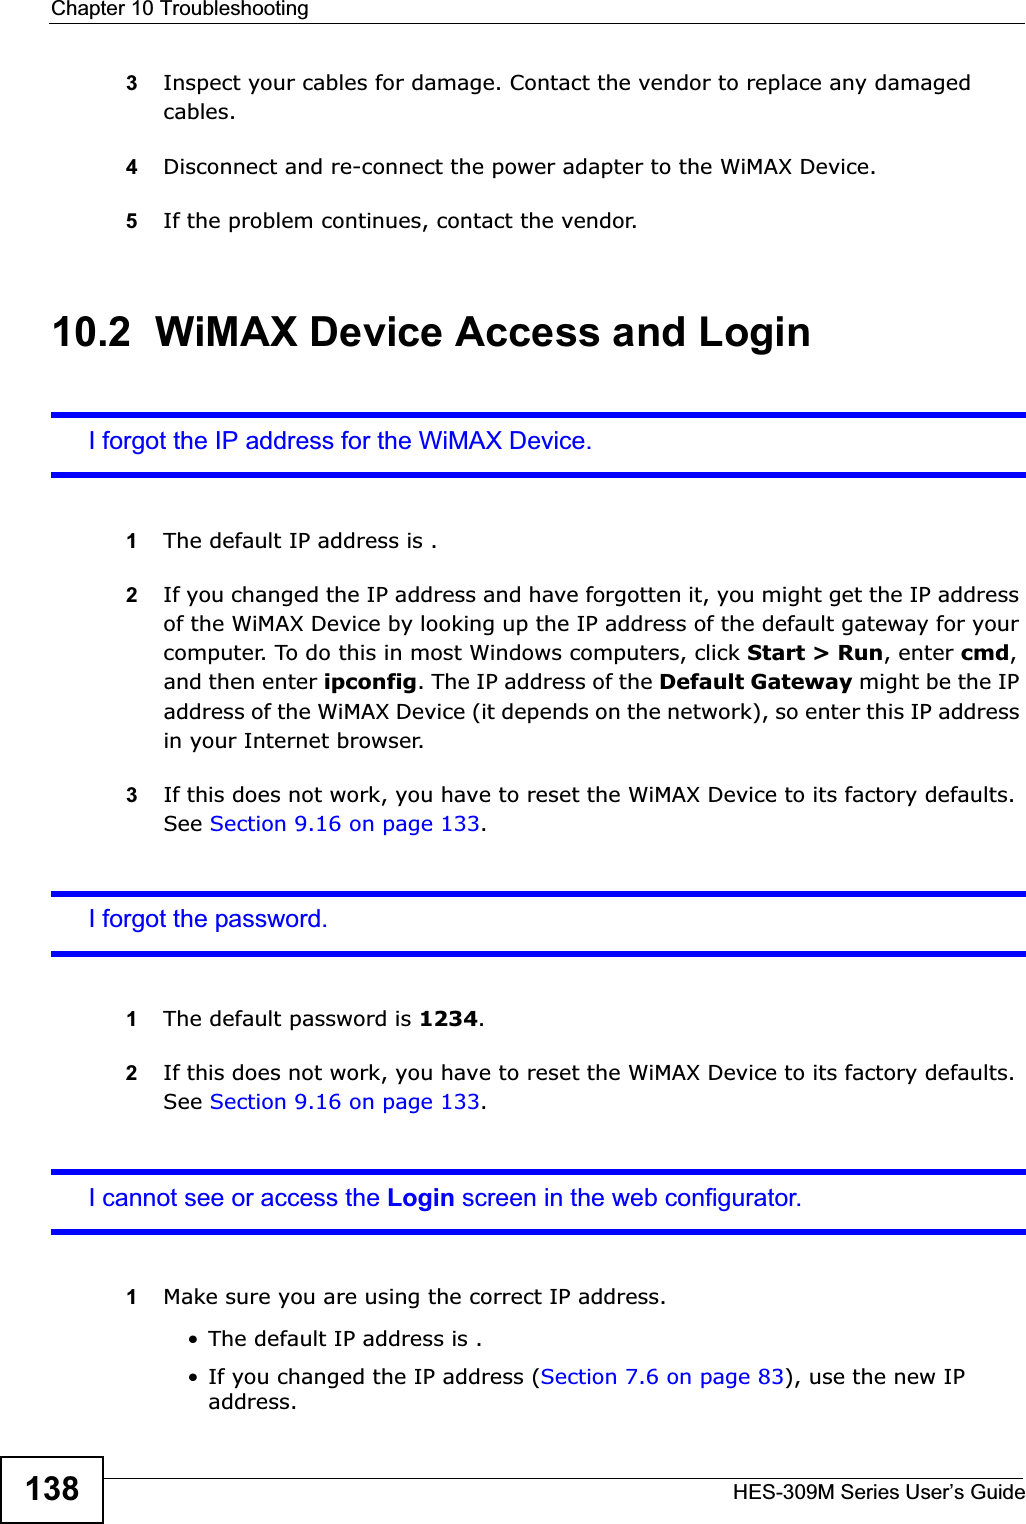 Chapter 10 TroubleshootingHES-309M Series User’s Guide1383Inspect your cables for damage. Contact the vendor to replace any damaged cables.4Disconnect and re-connect the power adapter to the WiMAX Device.5If the problem continues, contact the vendor.10.2  WiMAX Device Access and LoginI forgot the IP address for the WiMAX Device.1The default IP address is .2If you changed the IP address and have forgotten it, you might get the IP address of the WiMAX Device by looking up the IP address of the default gateway for your computer. To do this in most Windows computers, click Start &gt; Run, enter cmd,and then enter ipconfig. The IP address of the Default Gateway might be the IP address of the WiMAX Device (it depends on the network), so enter this IP address in your Internet browser.3If this does not work, you have to reset the WiMAX Device to its factory defaults. See Section 9.16 on page 133.I forgot the password.1The default password is 1234.2If this does not work, you have to reset the WiMAX Device to its factory defaults. See Section 9.16 on page 133.I cannot see or access the Login screen in the web configurator.1Make sure you are using the correct IP address.• The default IP address is .• If you changed the IP address (Section 7.6 on page 83), use the new IP address.